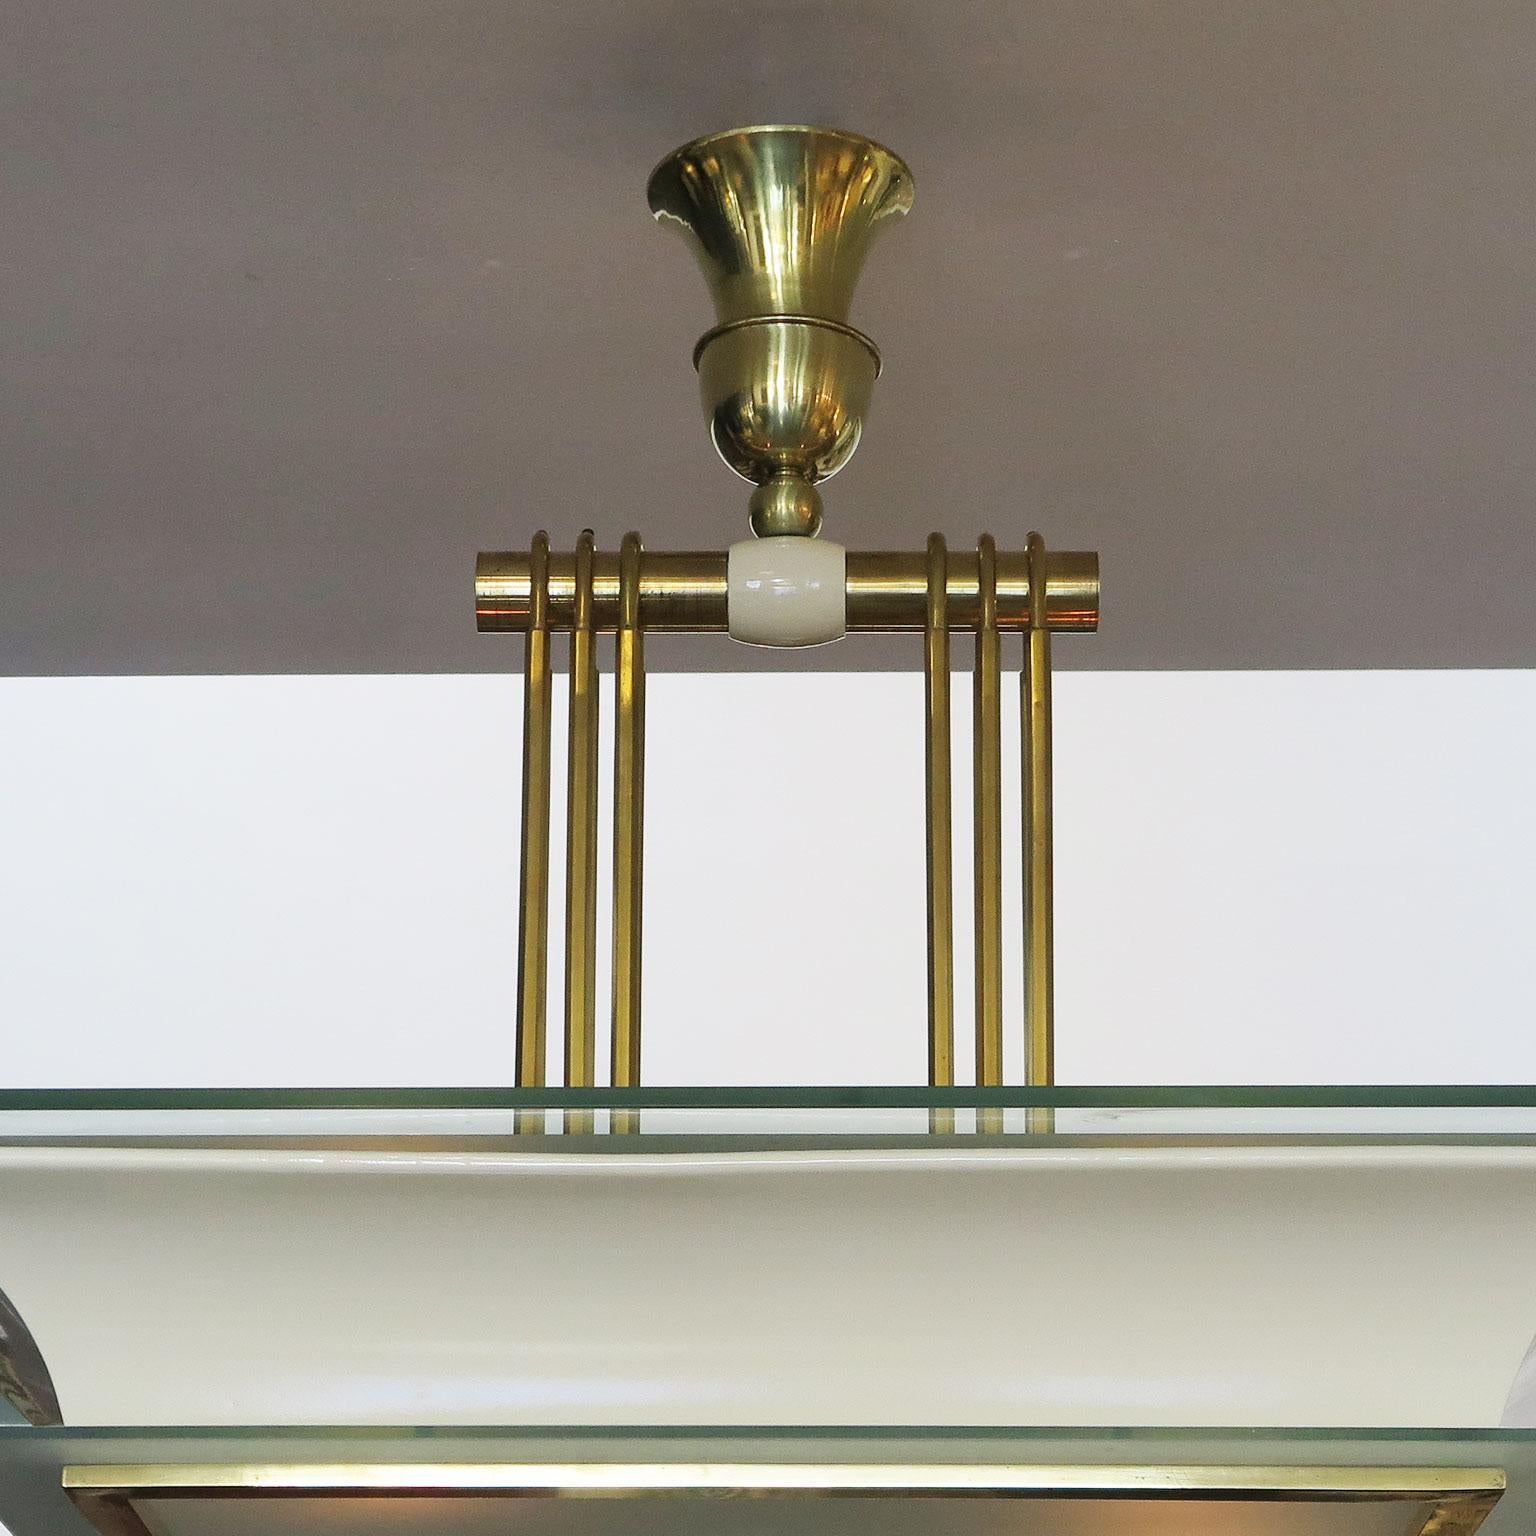 20th Century Art Deco Chandelier in Cream Lacquer and Glass with Brass Details